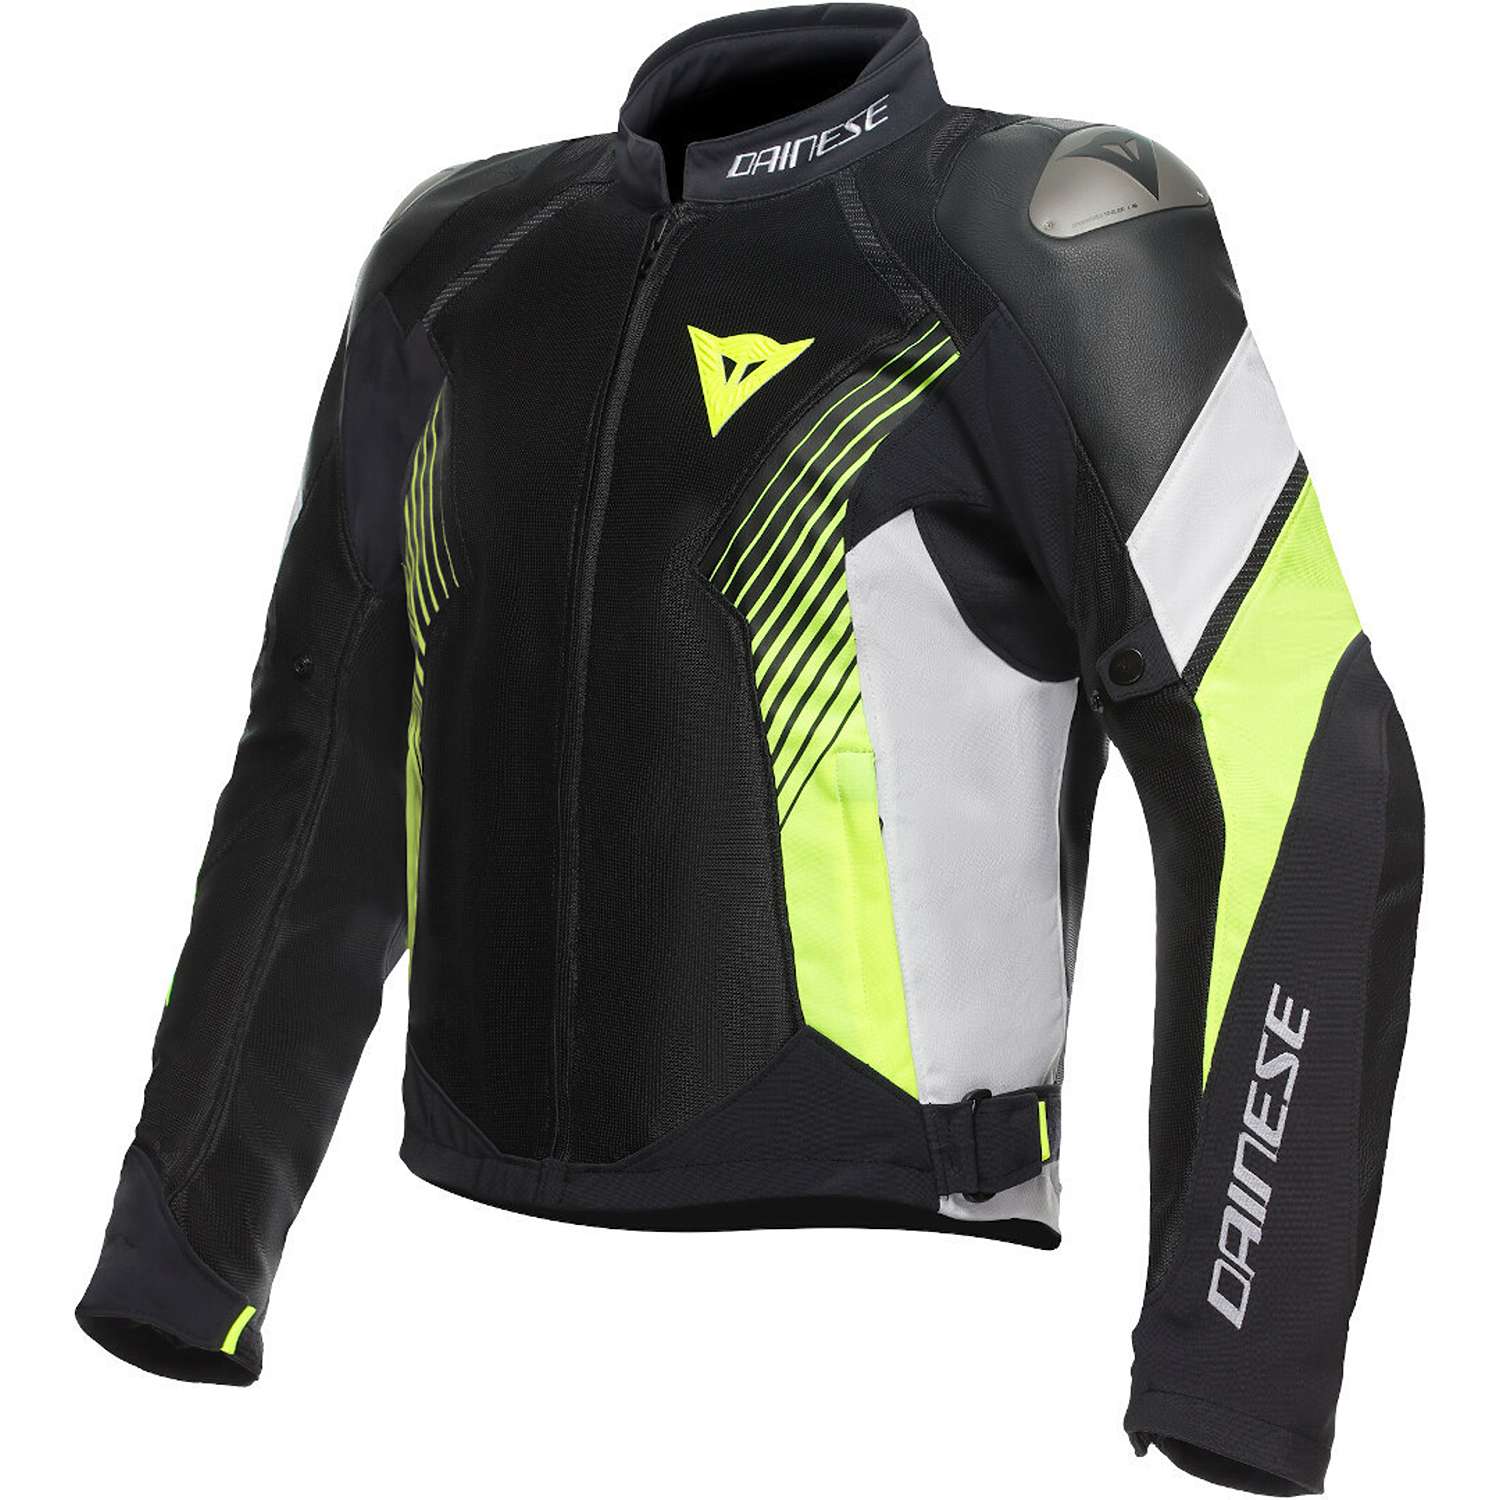 Image of EU Dainese Super Rider 2 Absoluteshell Jacket Black White Fluo Yellow Taille 52